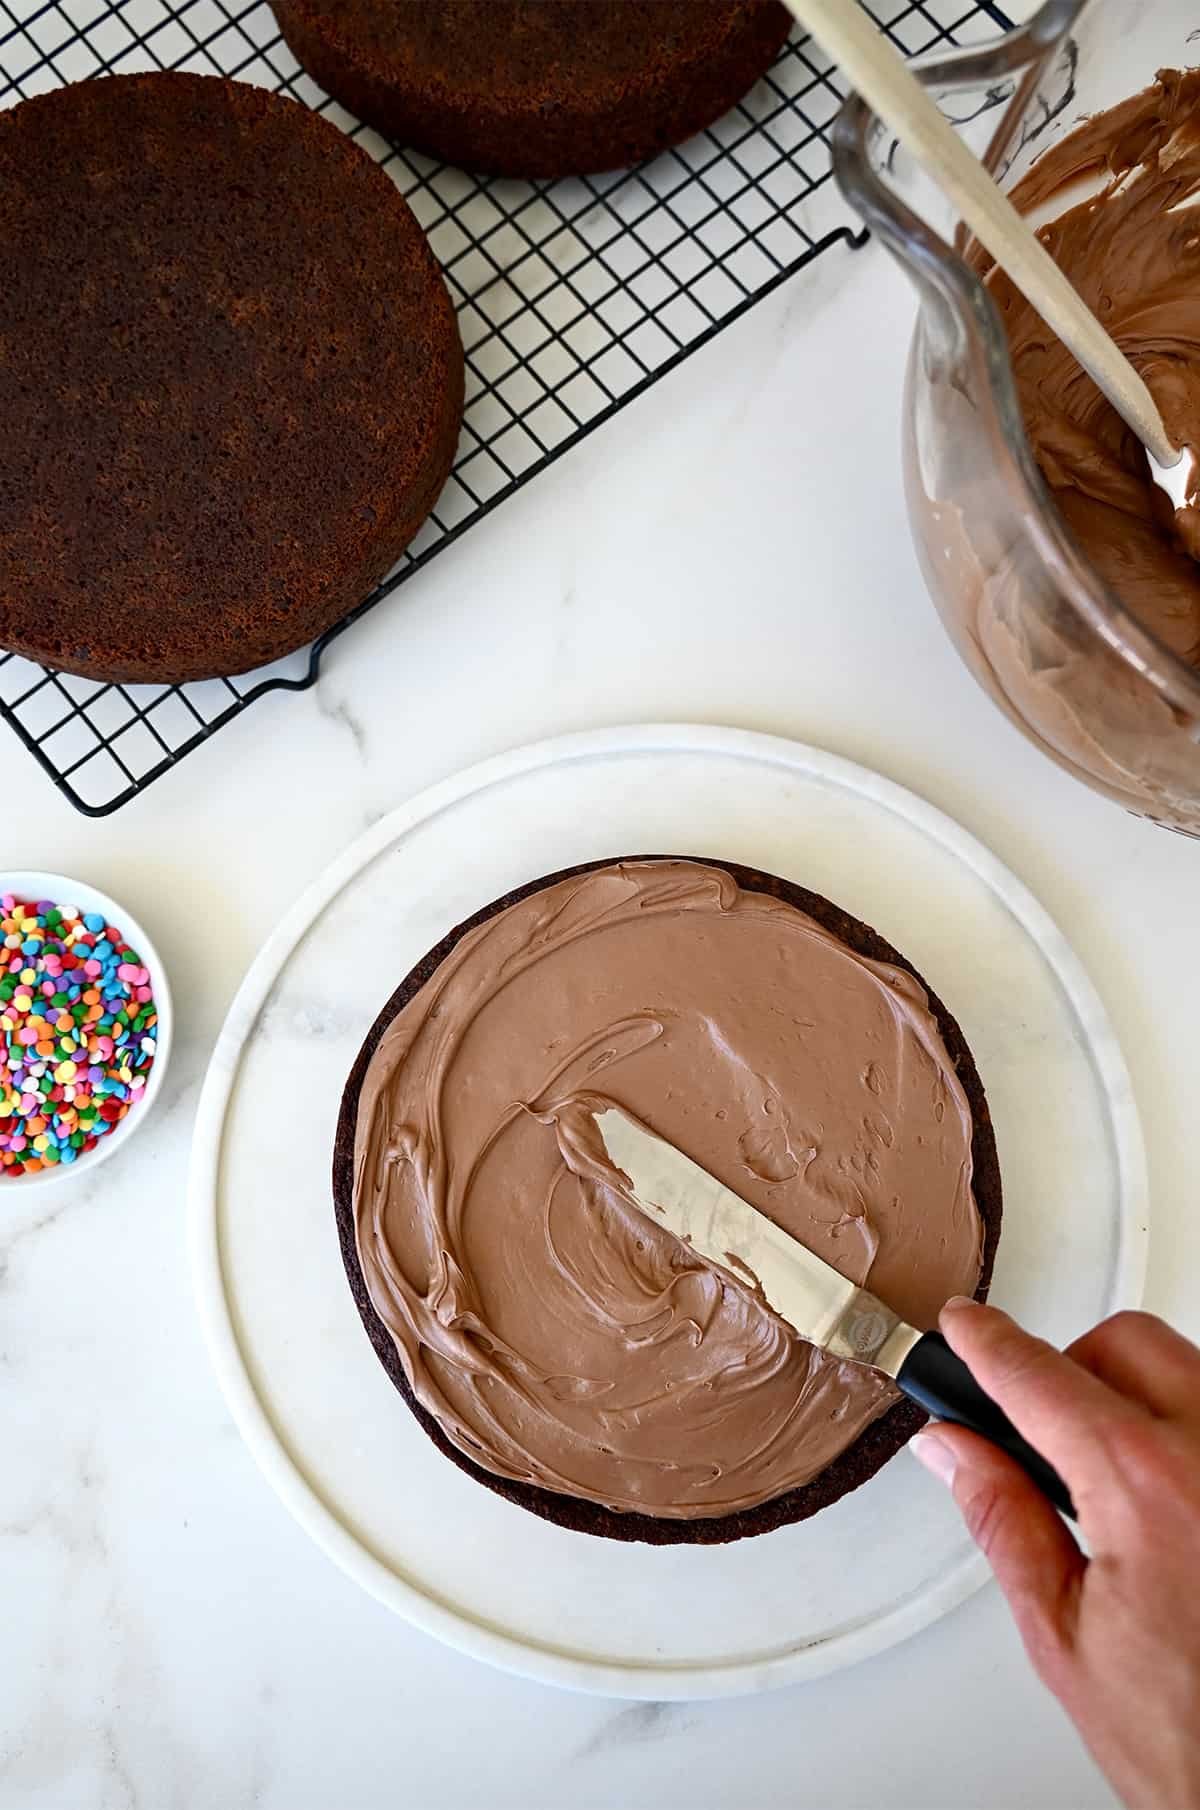 A hand holding an offset spatula spreads coffee buttercream frosting atop a chocolate cake.